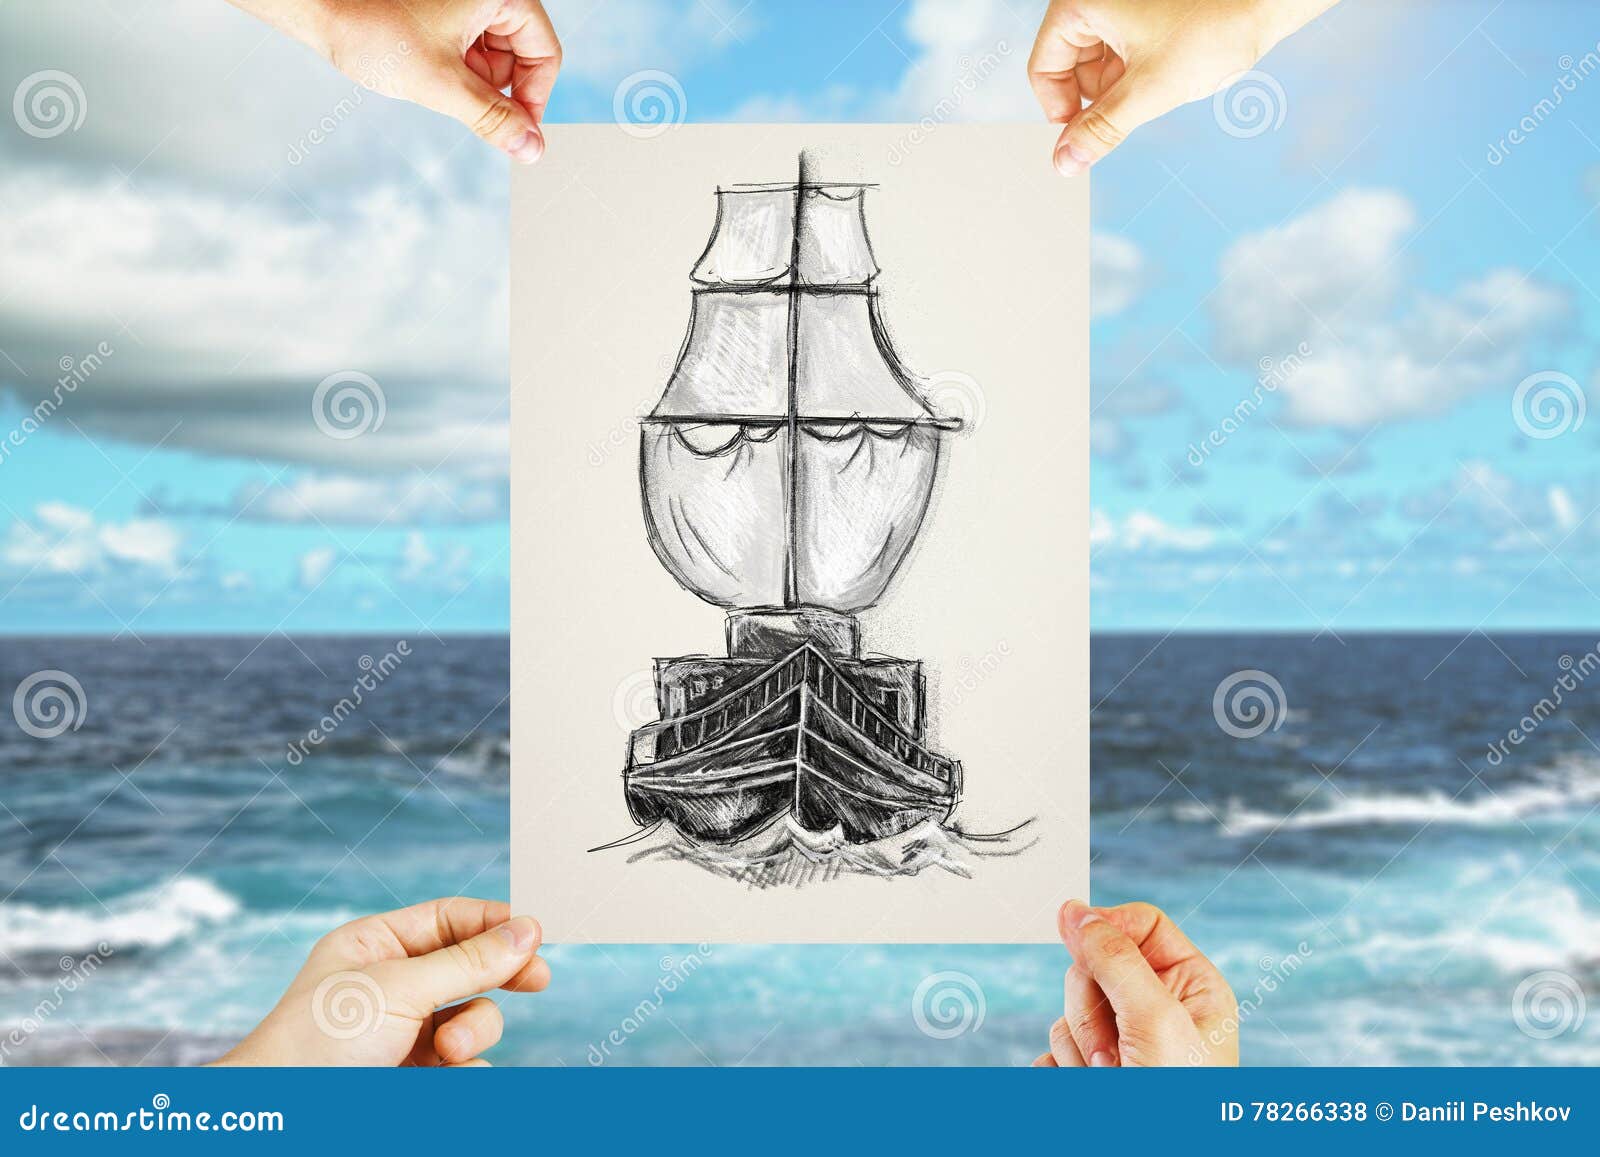 Sailing and travel concept stock photo. Image of coast - 78266338